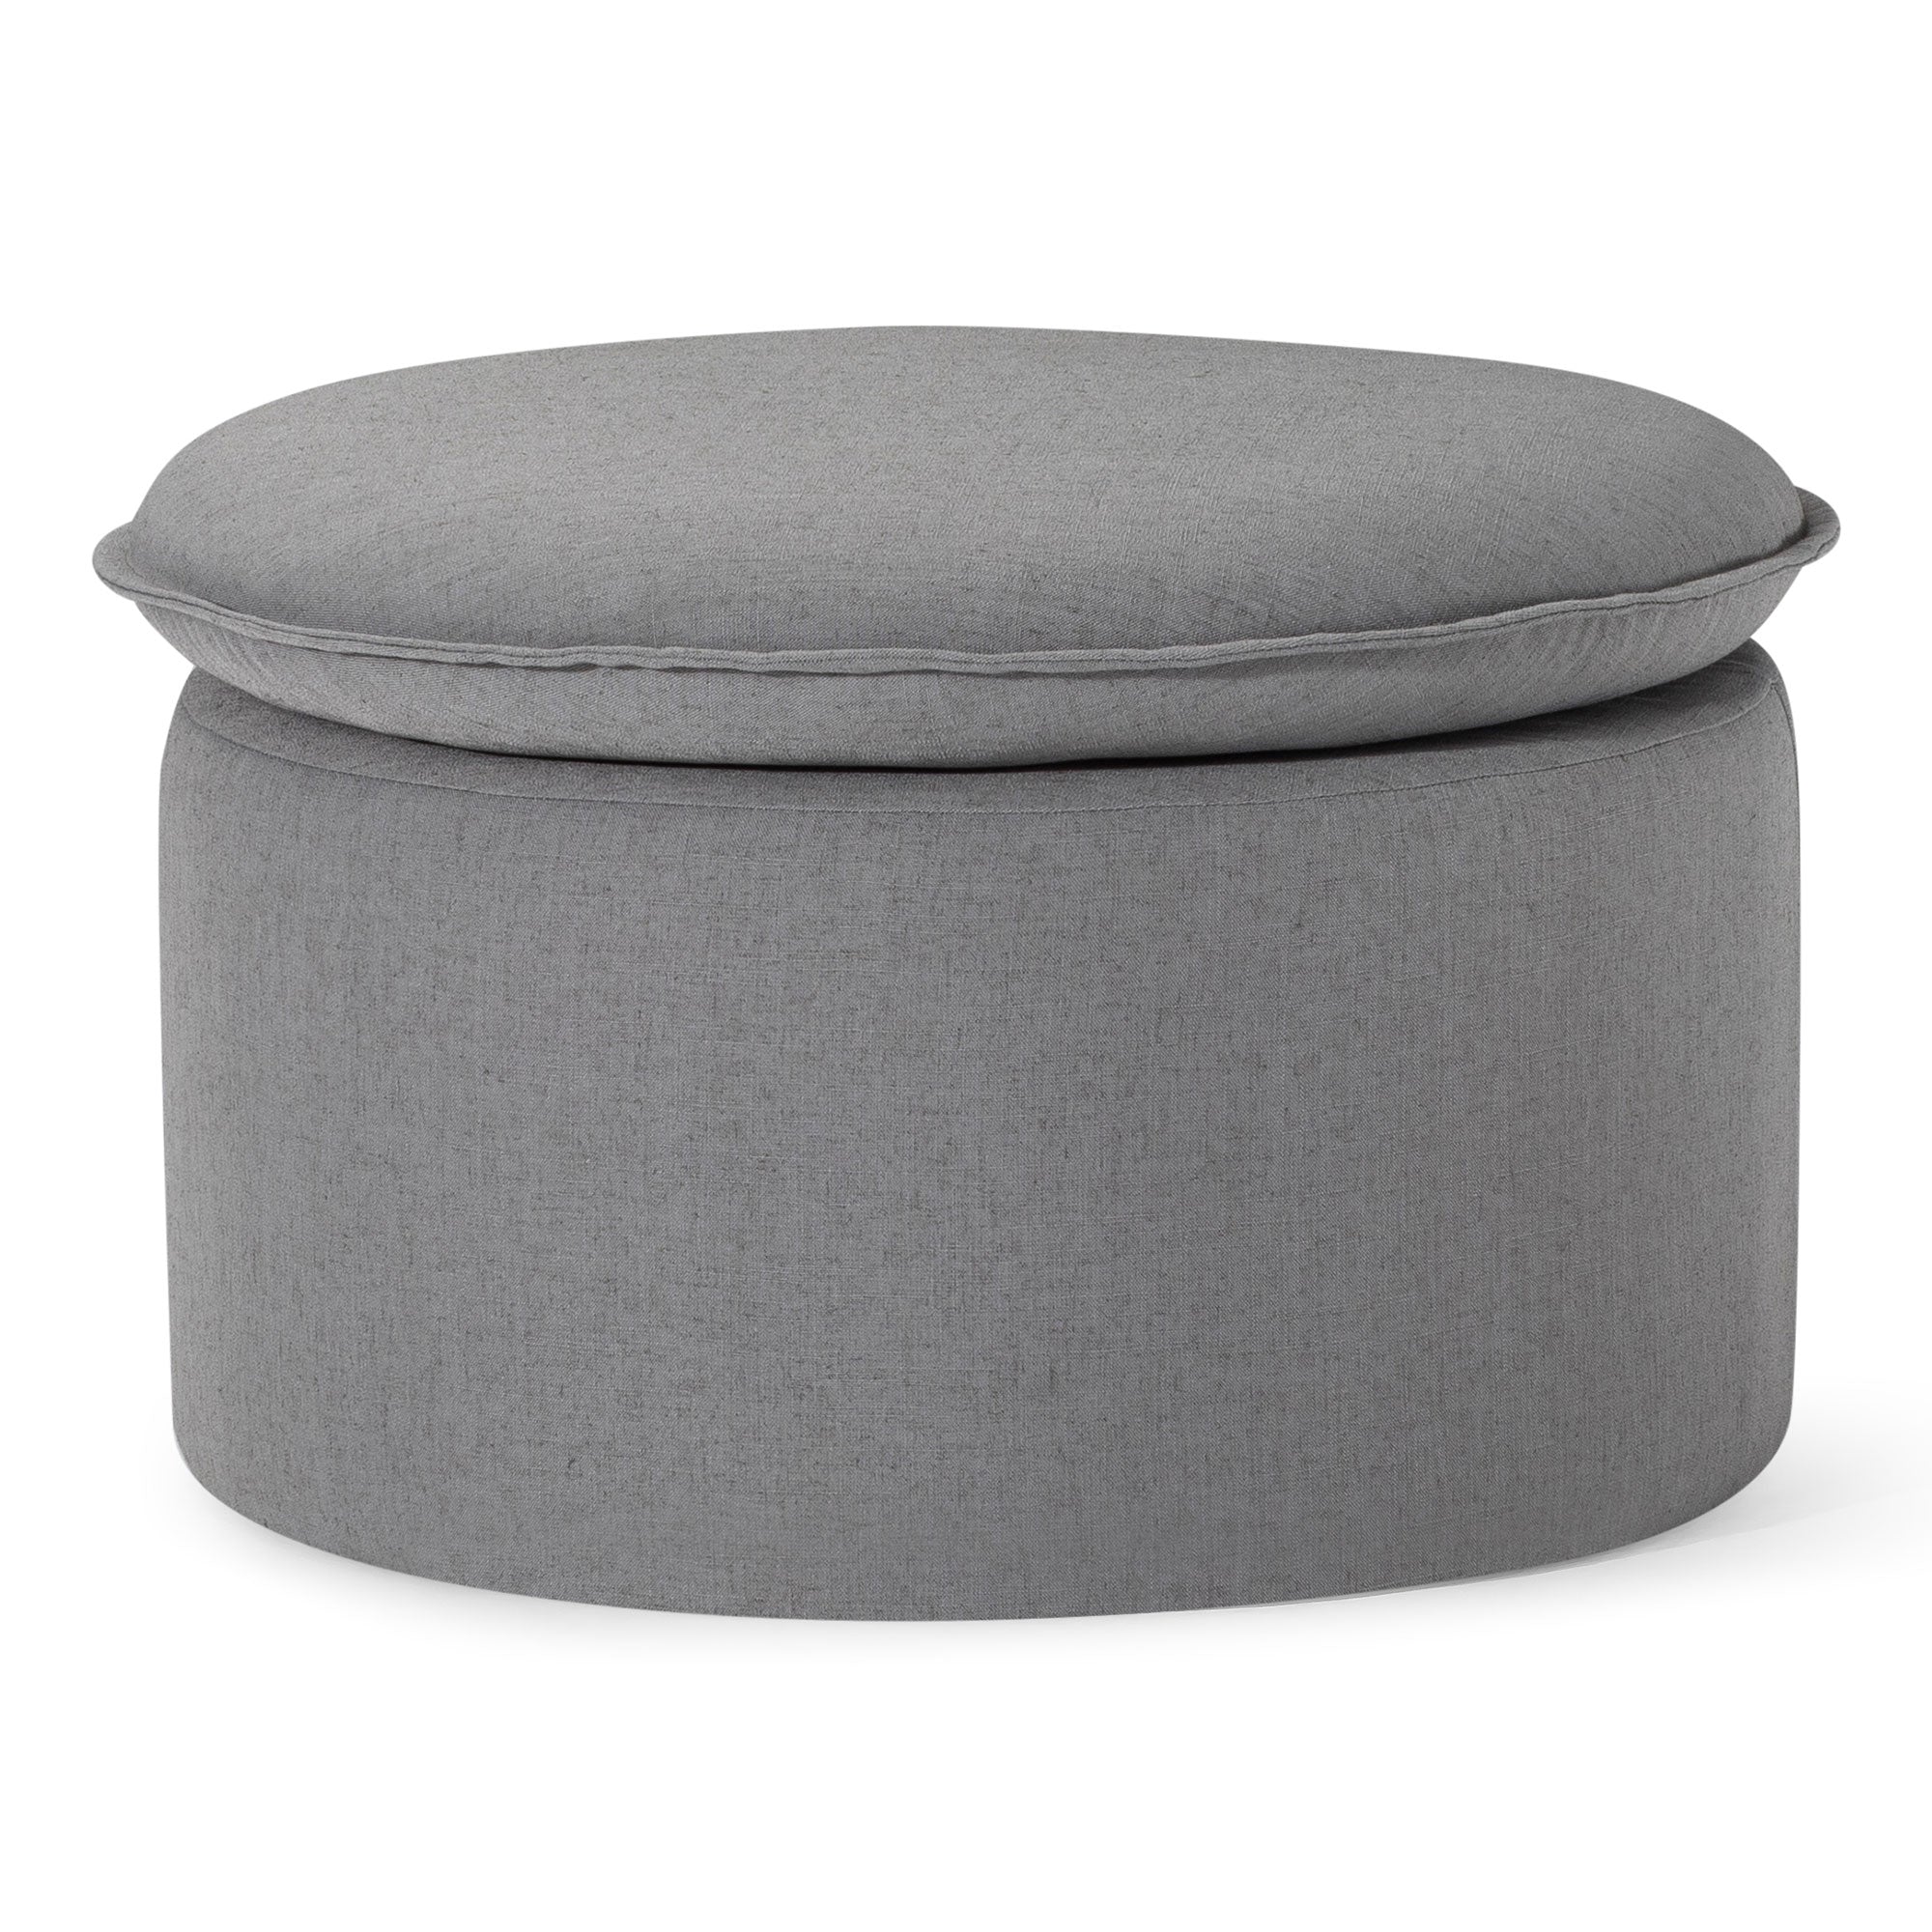 Lyra Organic Ottoman in Slate Fabric Upholstery in Ottomans & Benches by Maven Lane